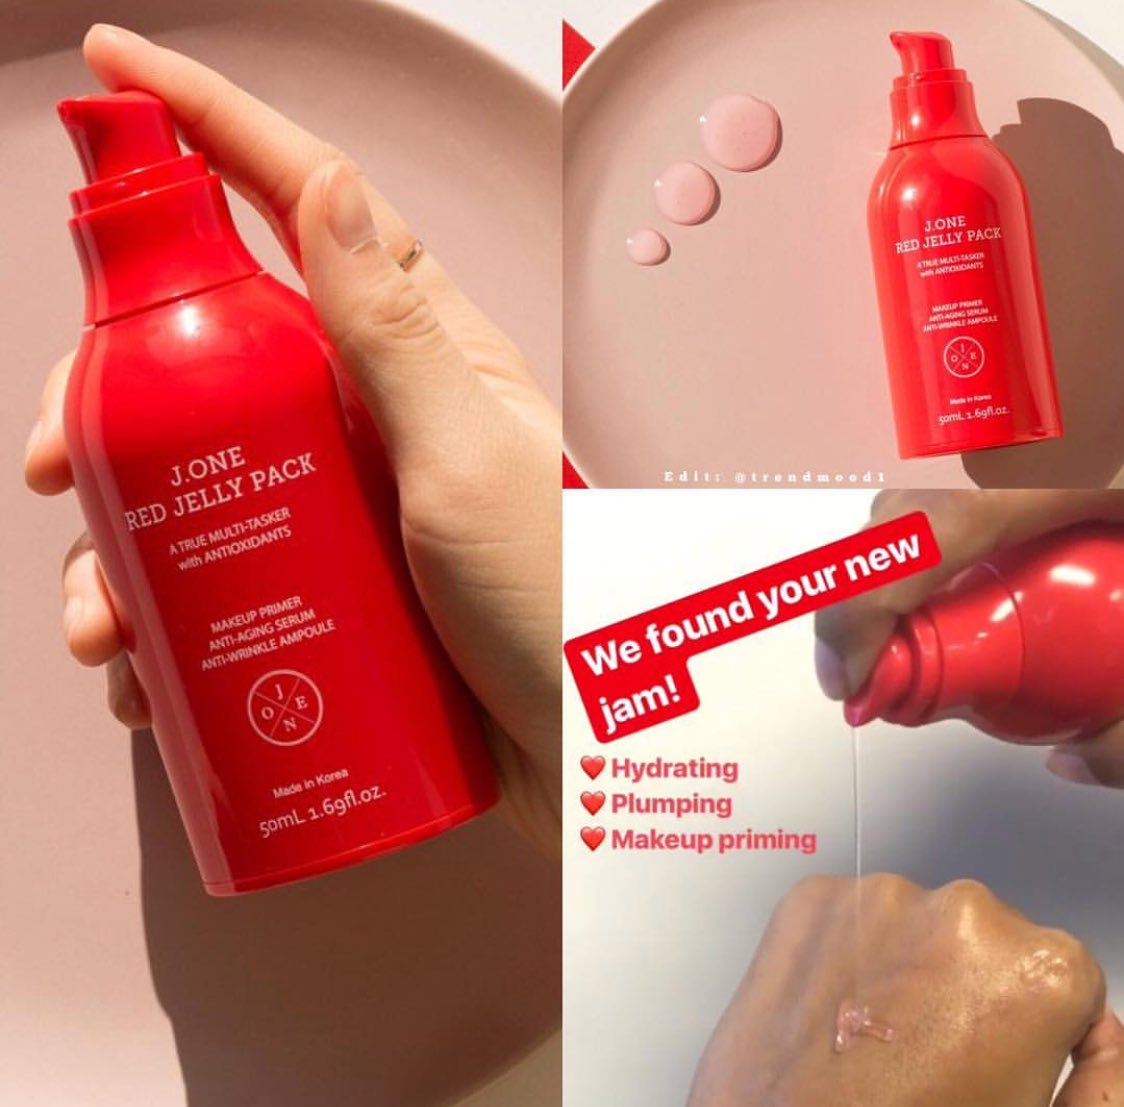 Trendmood New Product By Glowrecipe J One Red Jelly Pack An Ampoule And Primer In One This Rosy Hued Multitasker Instantly Boosts Skin S Natural Anti Aging Powers While Simultaneously